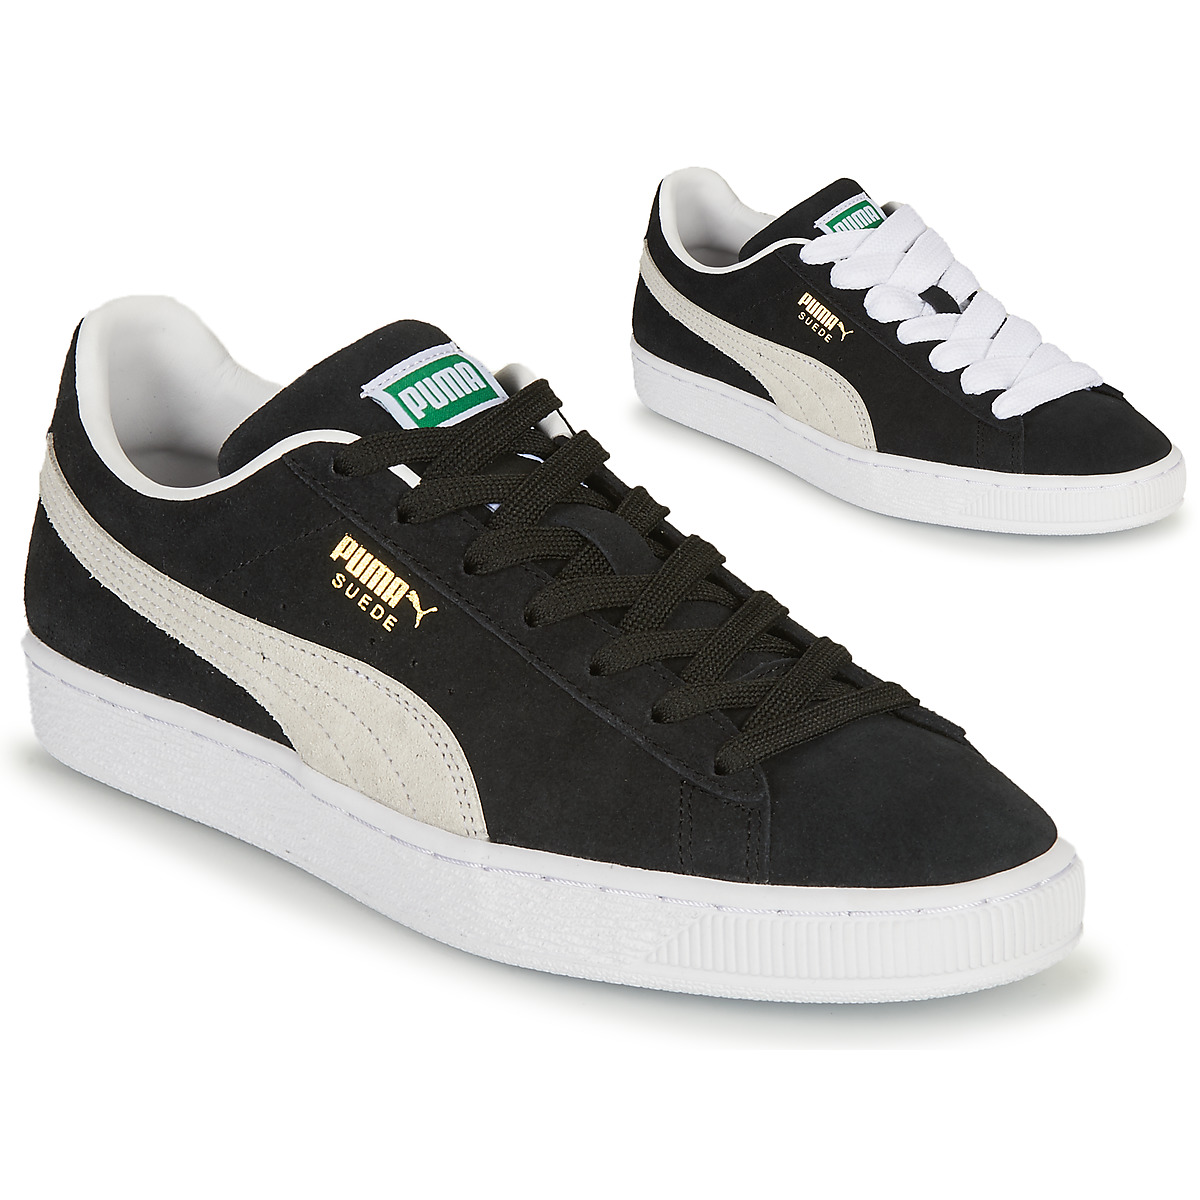 Puma SUEDE Black - Fast delivery 